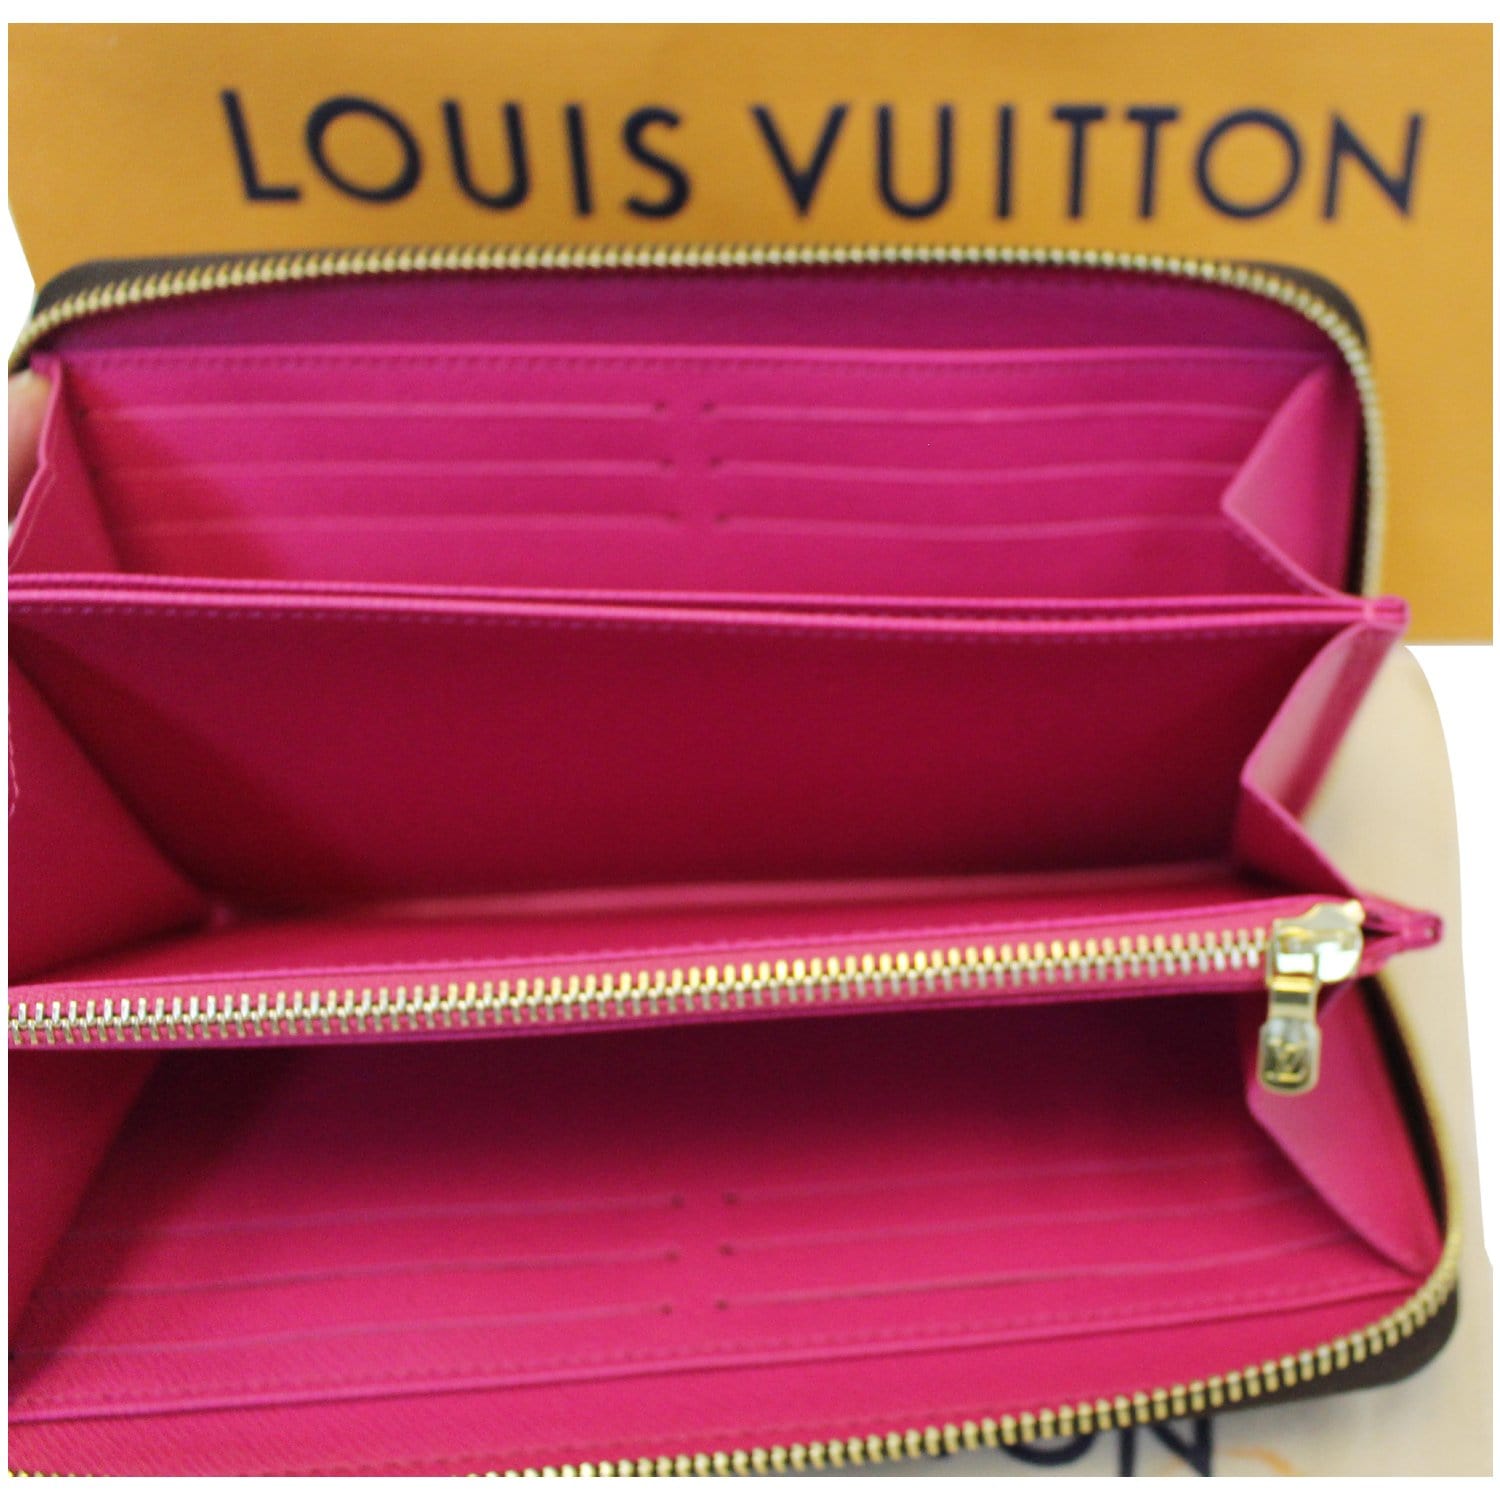 Authentic LOUIS VUITTON Crafty 2020 Coated Canvas Zippy Wallet, Red/Cream